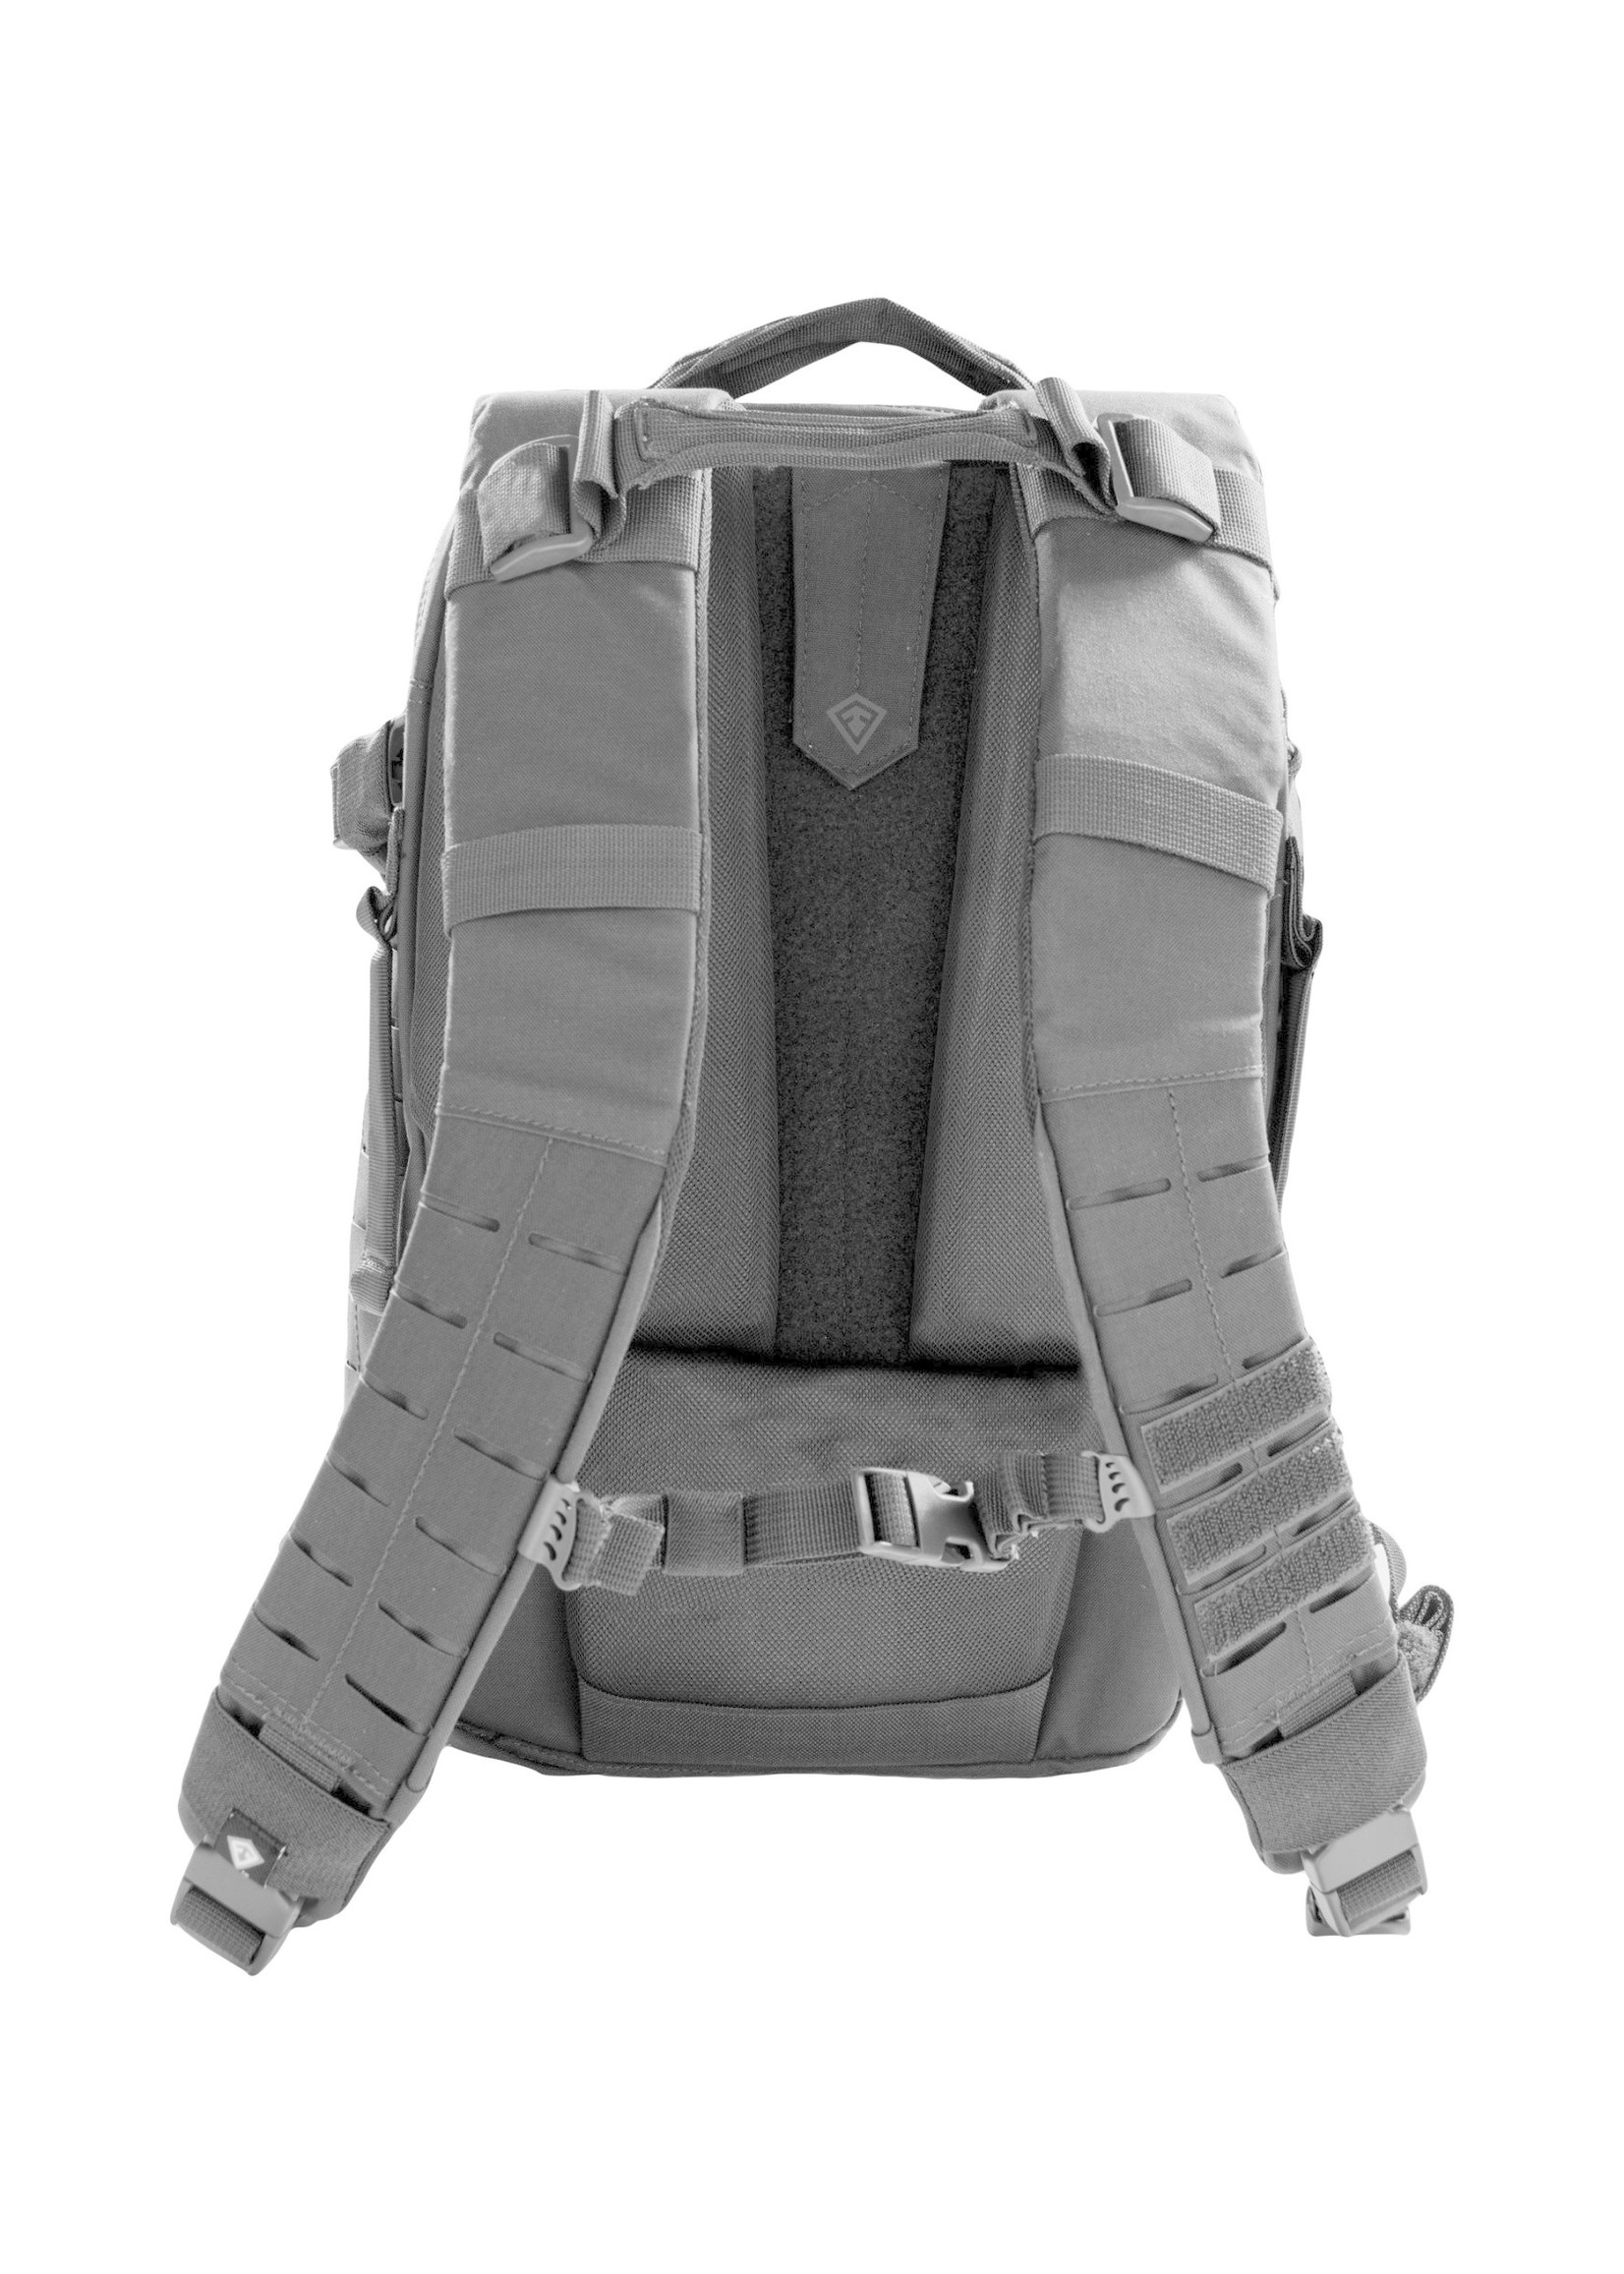 First Tactical First Tactical Tactix Half-Day Plus Backpack 27L